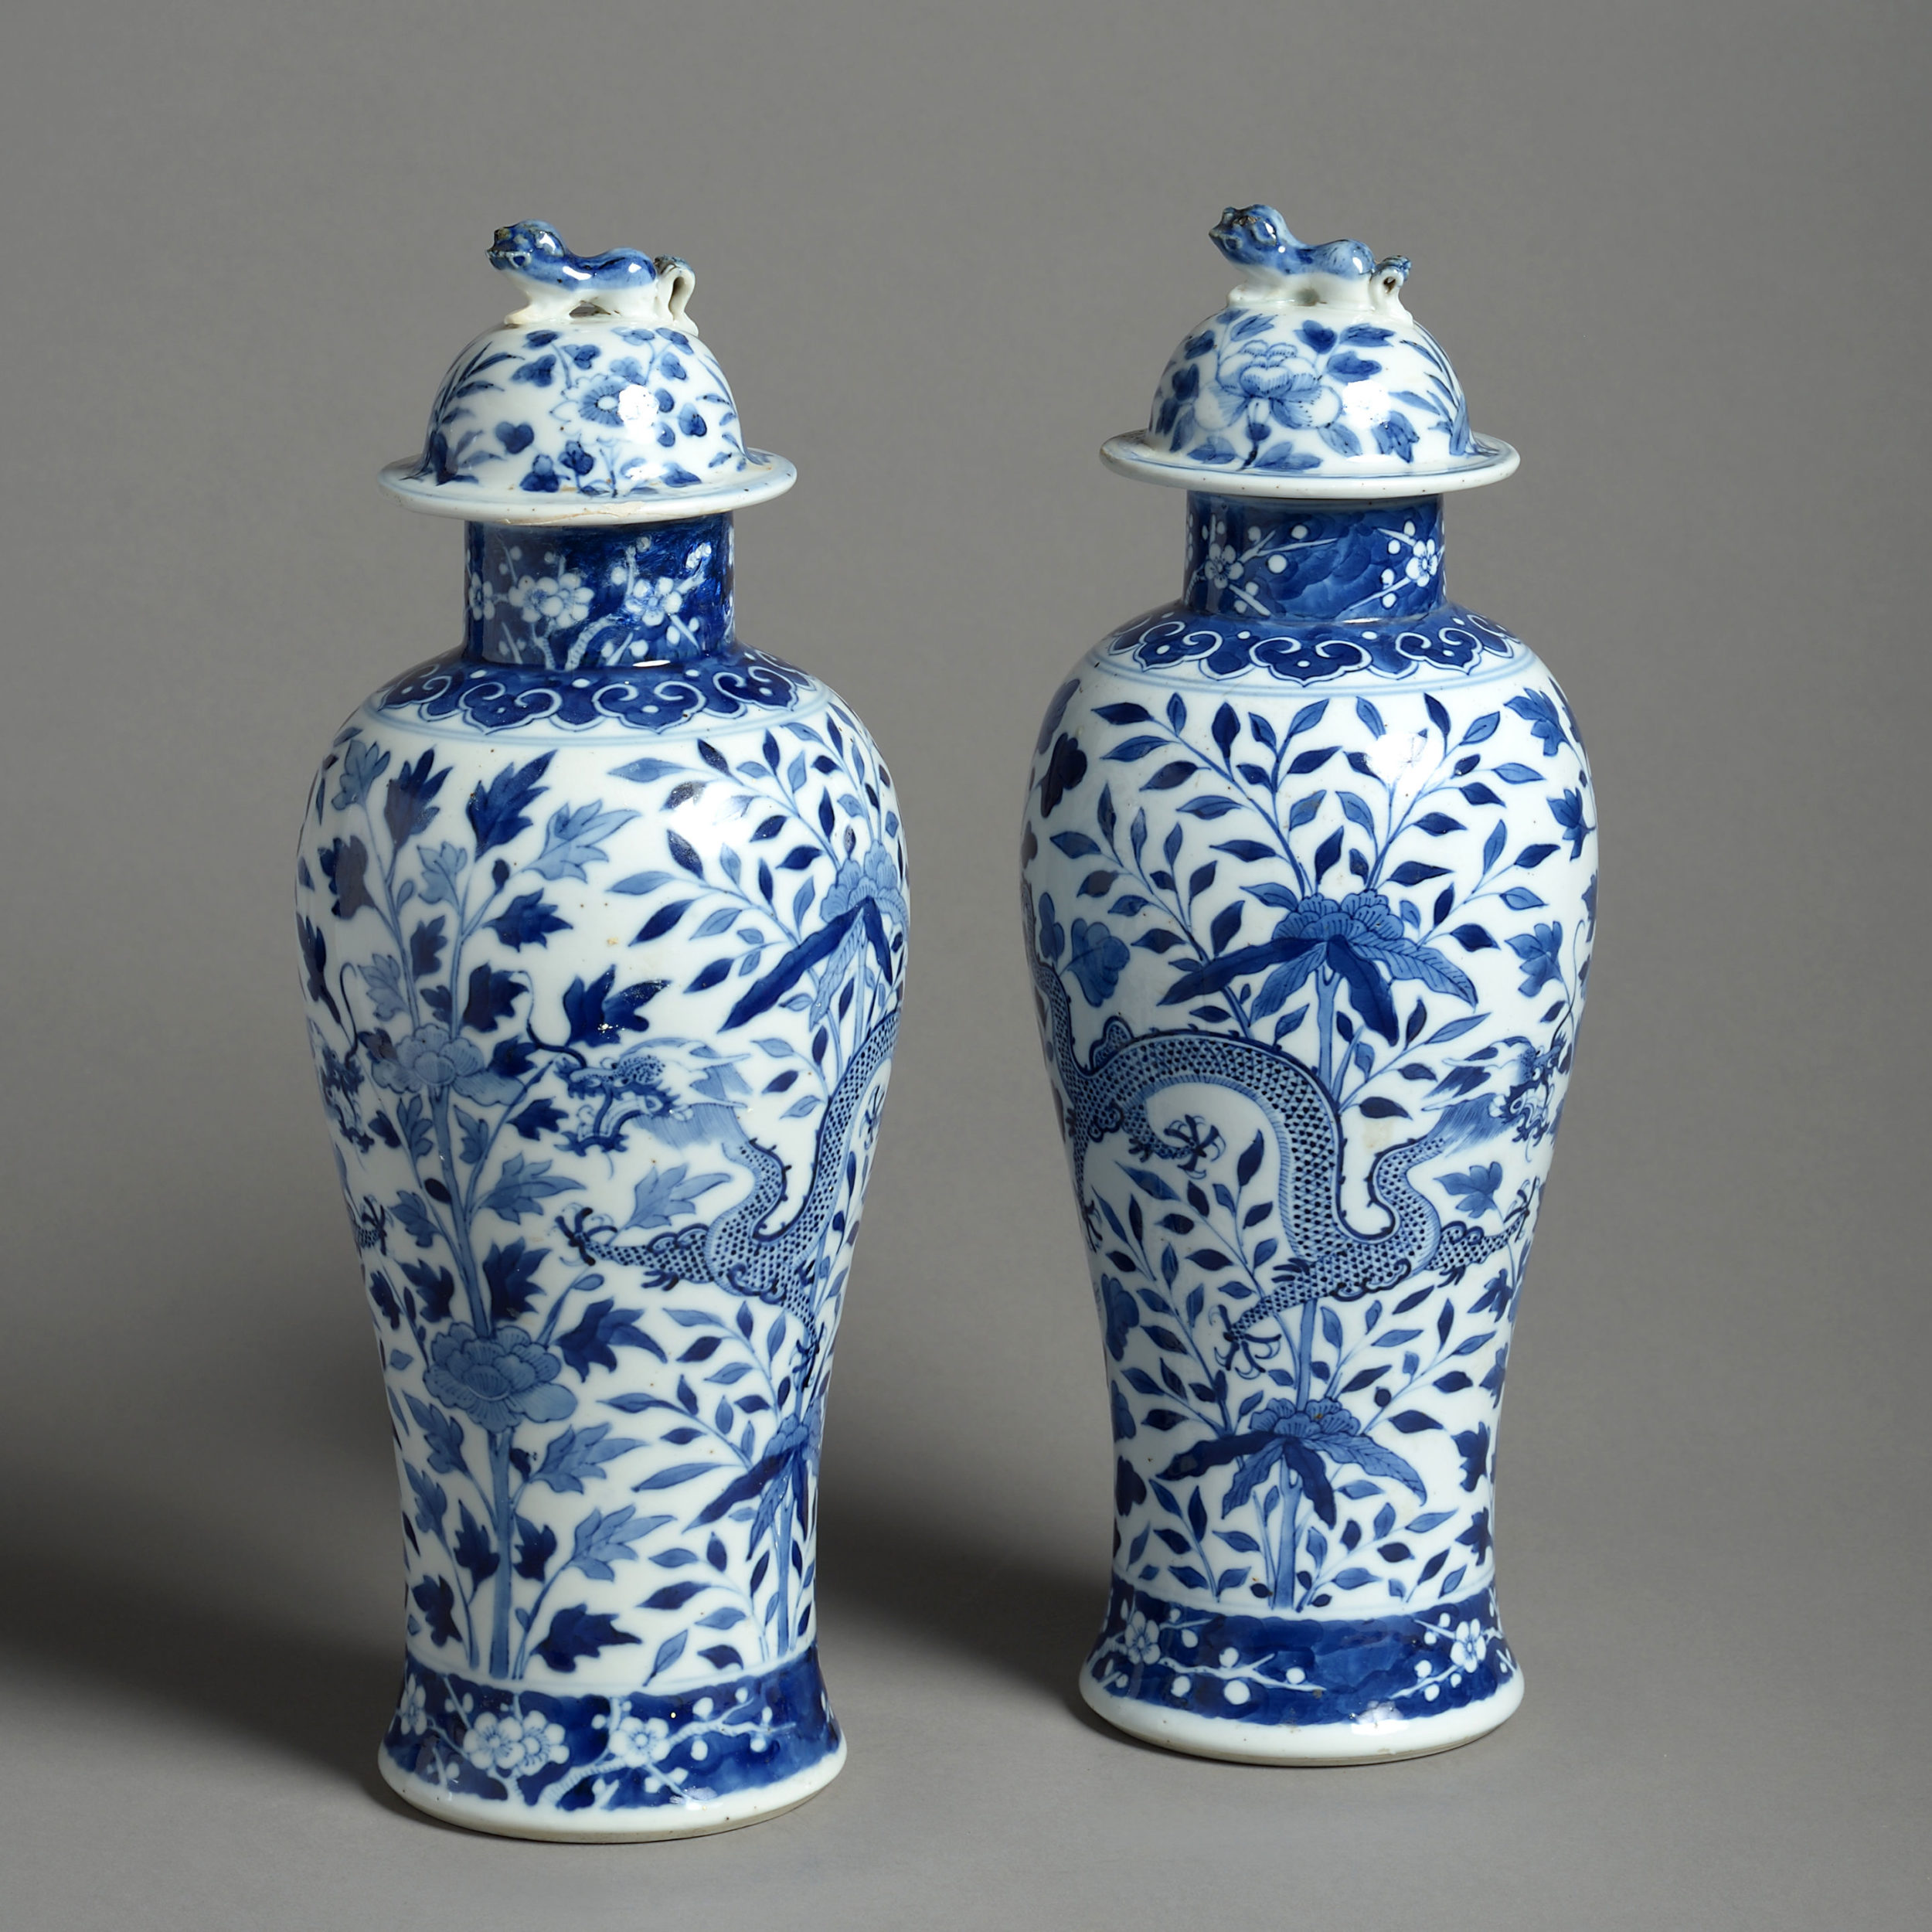 A Pair of 19th Century Blue and White Porcelain Vases | Timothy ...